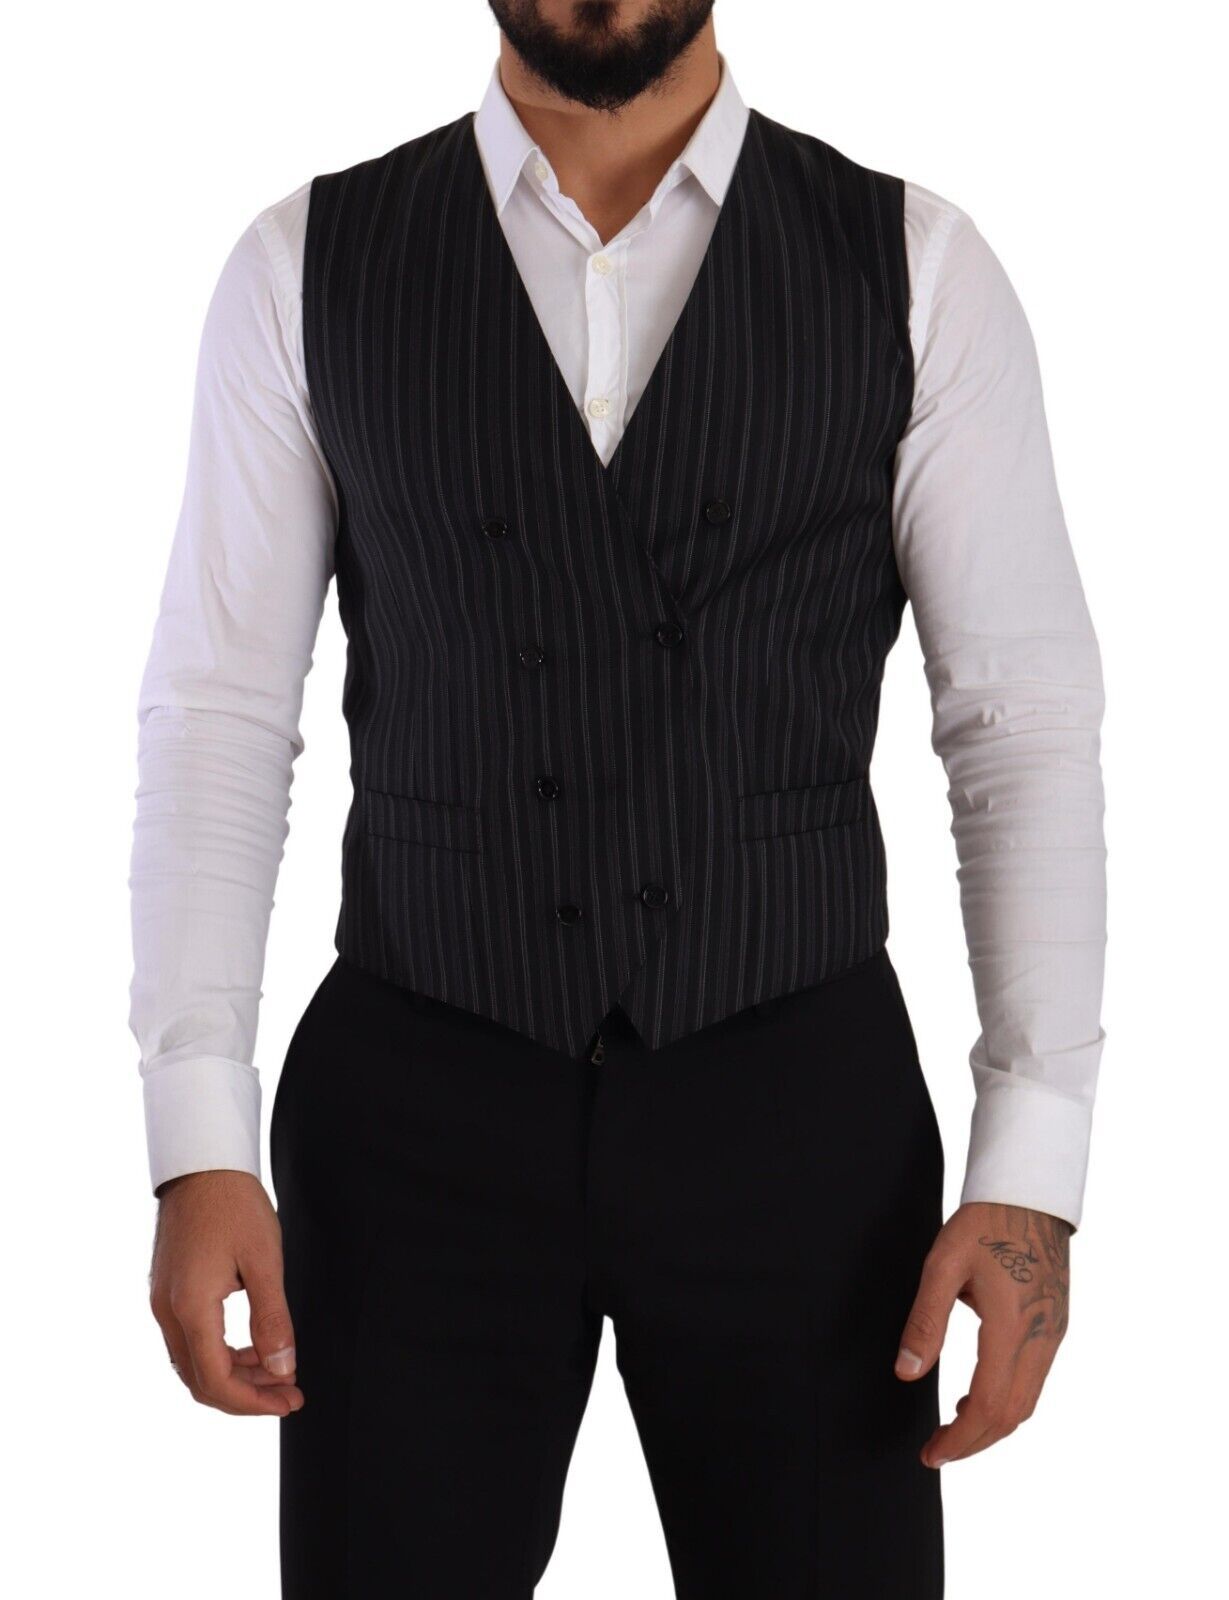 Black and Gray Dolce & Gabbana Gray Striped Double Breasted Waistcoat Vest